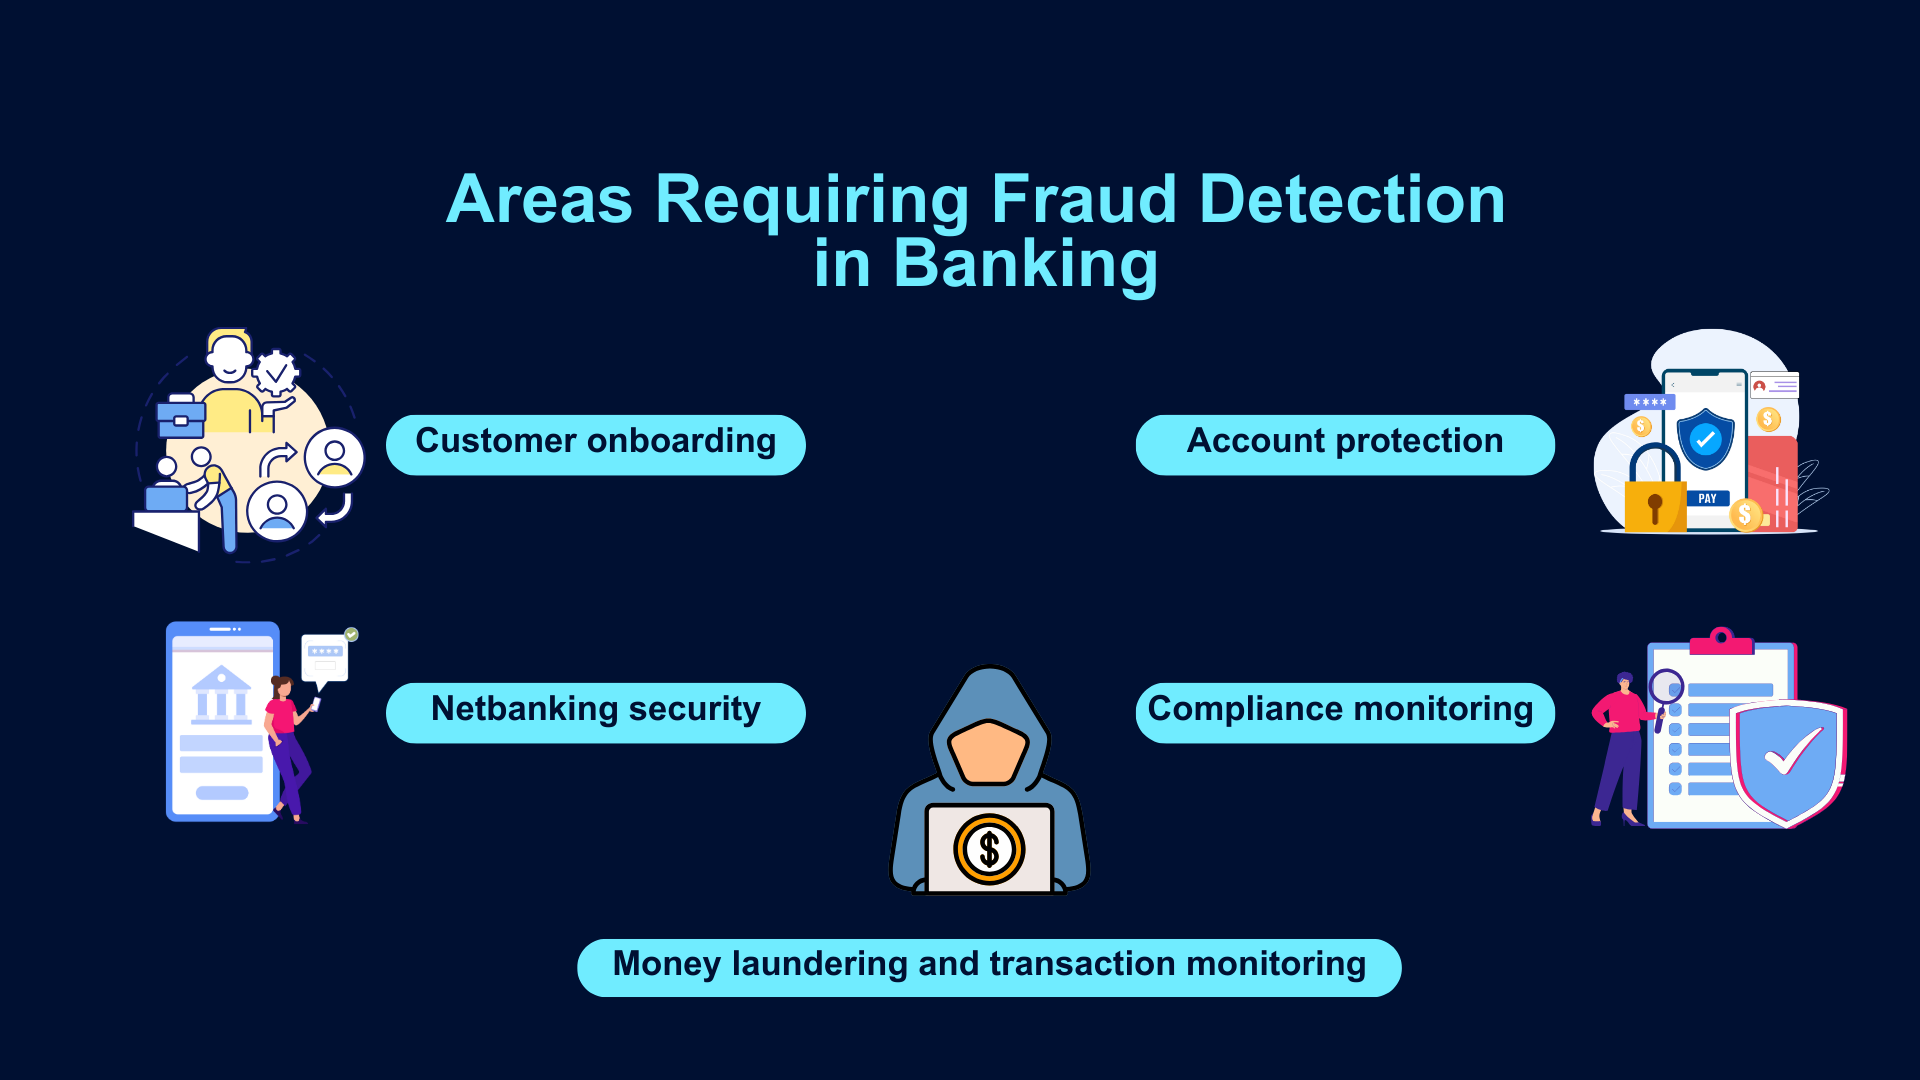 Fraud detection in banking